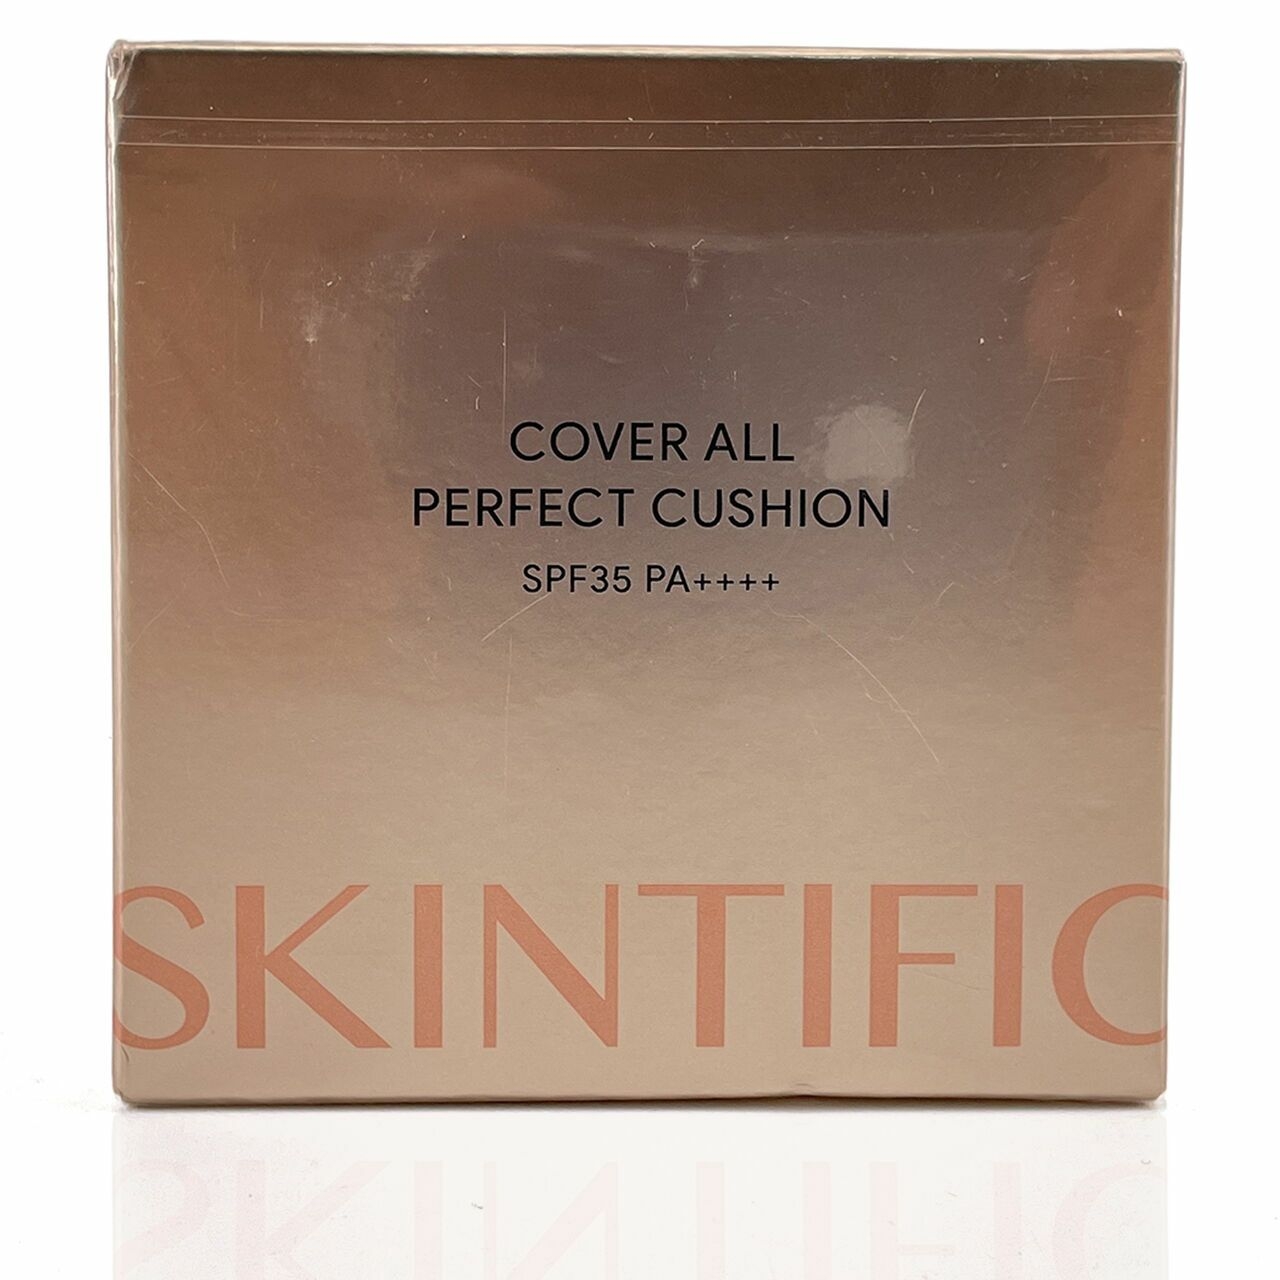 Skintific Vover All Perfect Cushion SPF35 PA++++ Faces